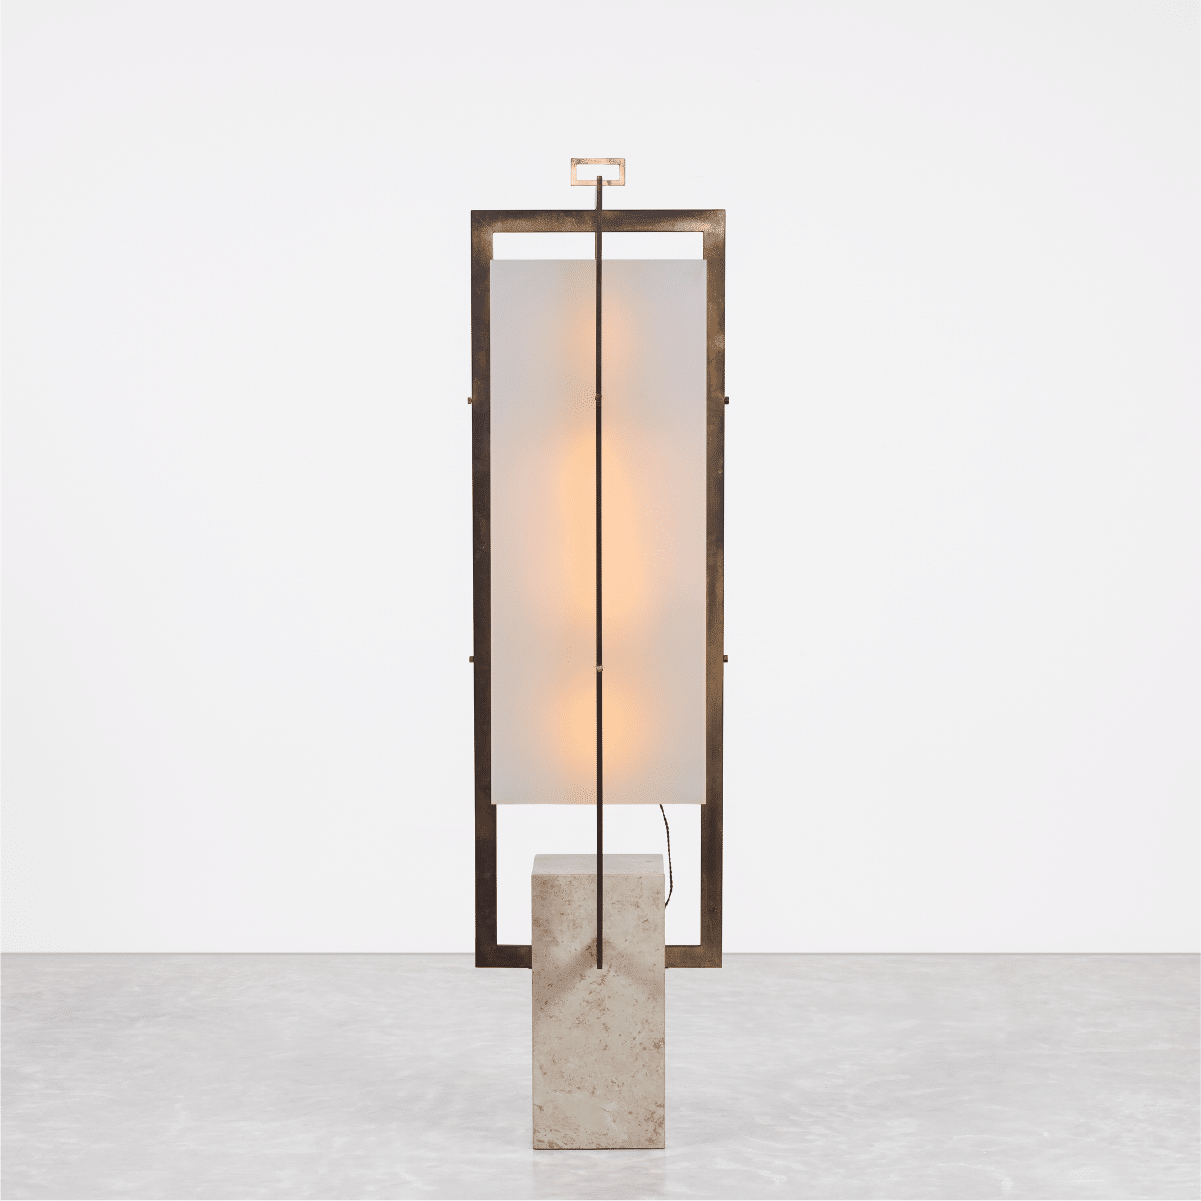 Low res for web_Brutalist Floor Lamp_CoupXX